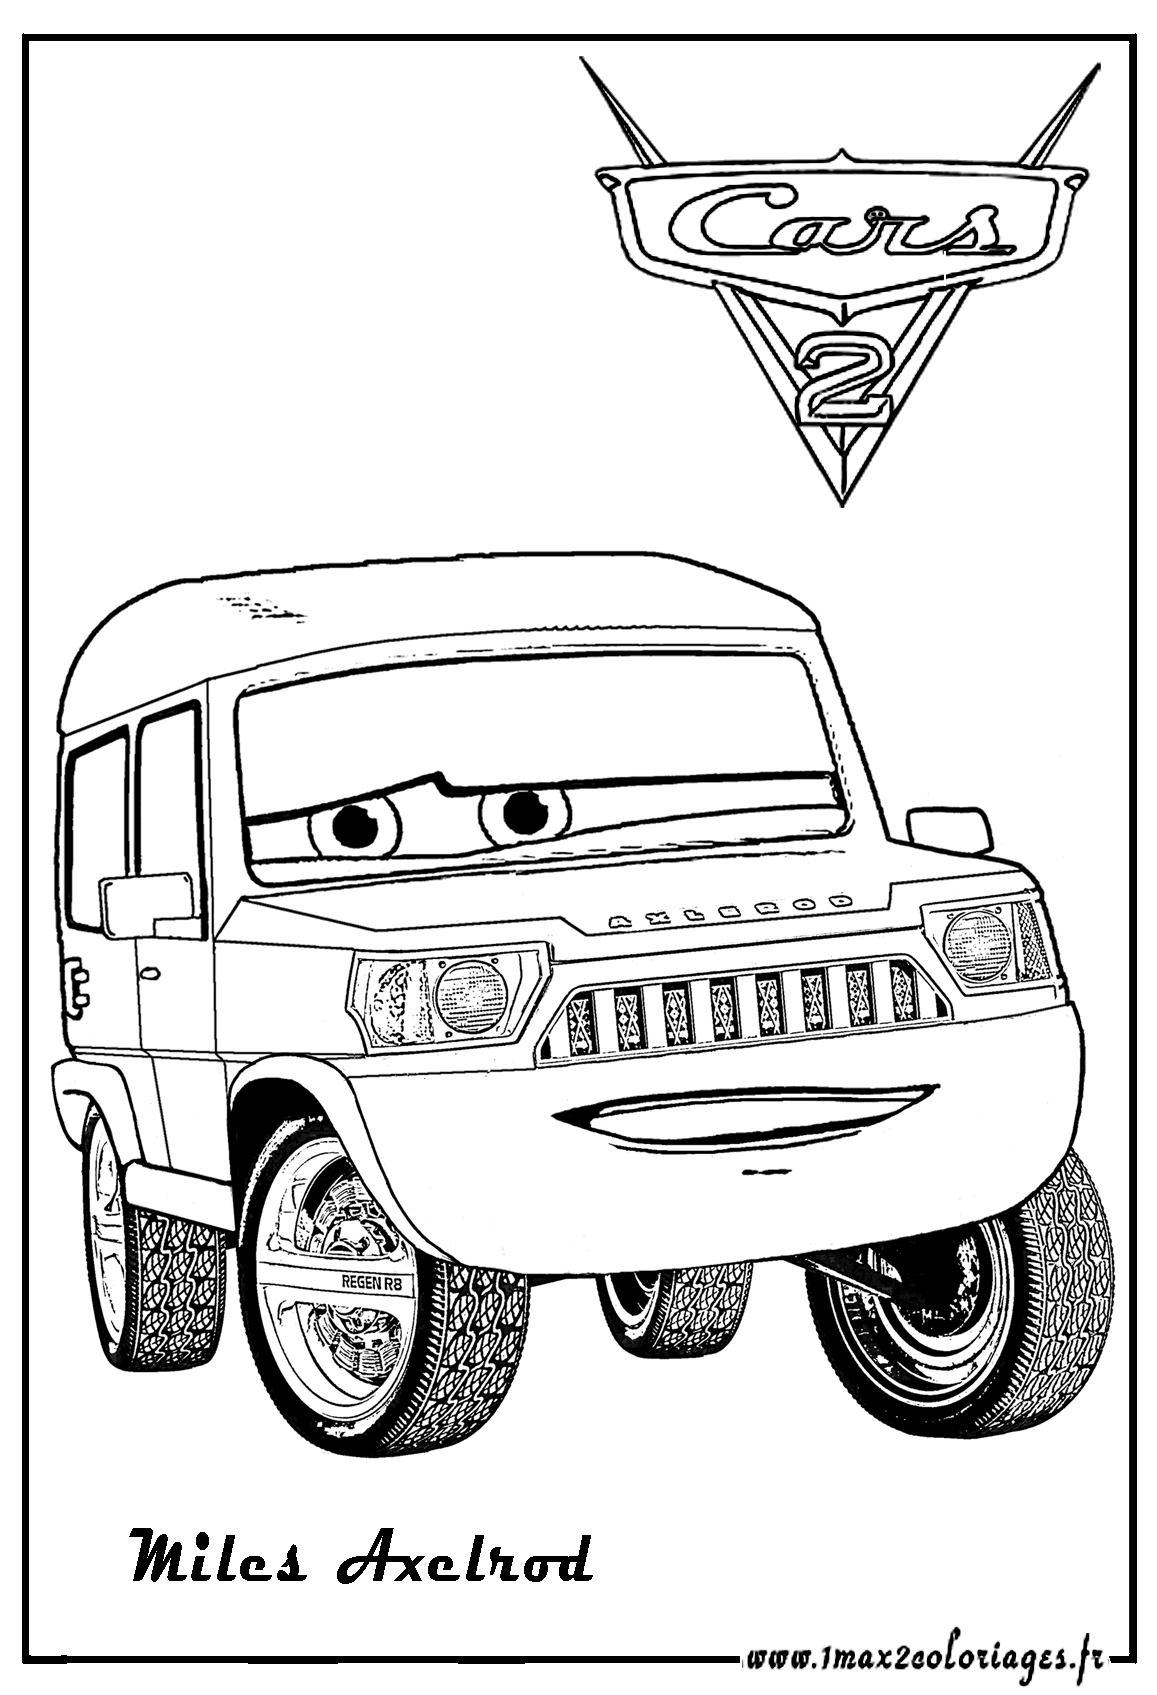 Cars 2 Coloring Pages To Download For Free - Cars 2 Kids Coloring Pages